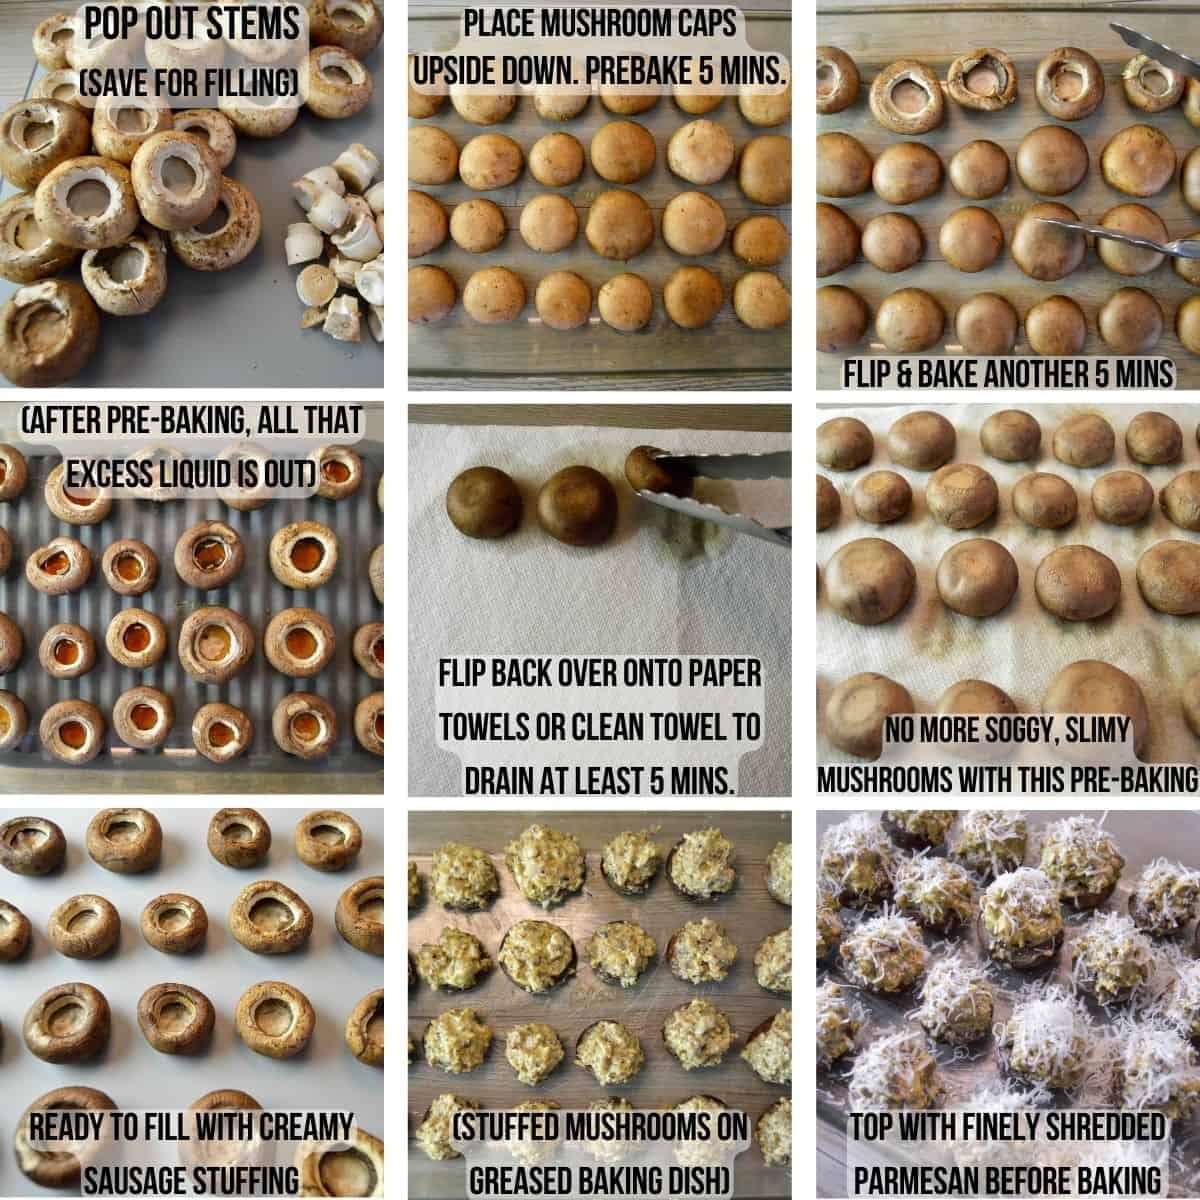 Steps for Pre-Baking and stuffing mushrooms in 9 image collage